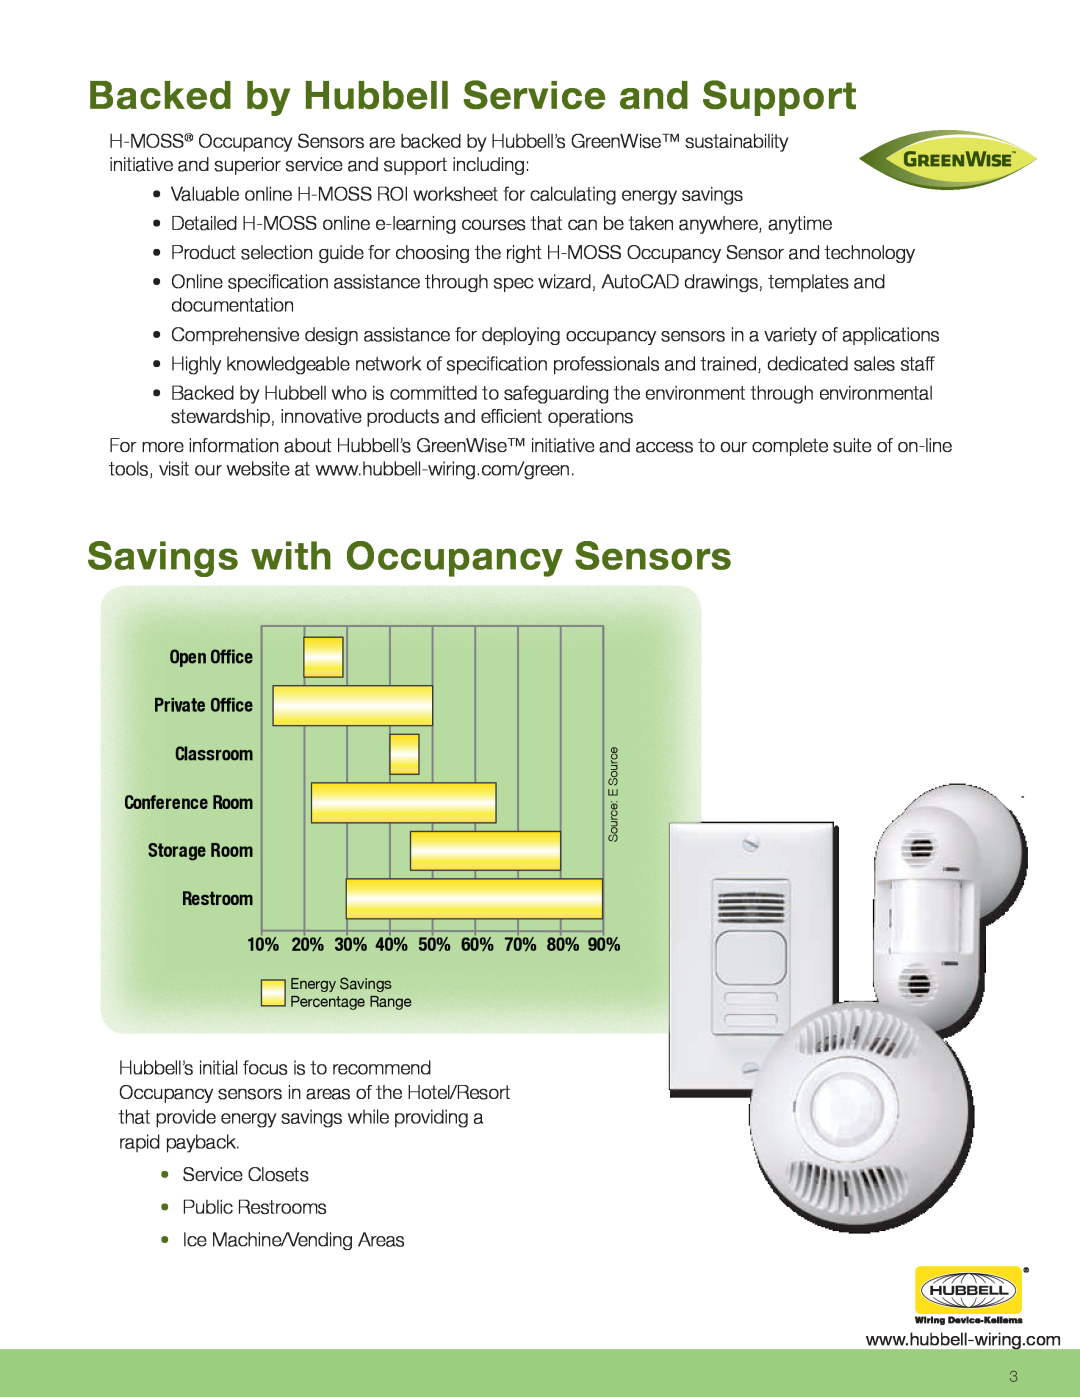 Hubbell CLT1554, CLT2054 manual Backed by Hubbell Service and Support, Savings with Occupancy Sensors 